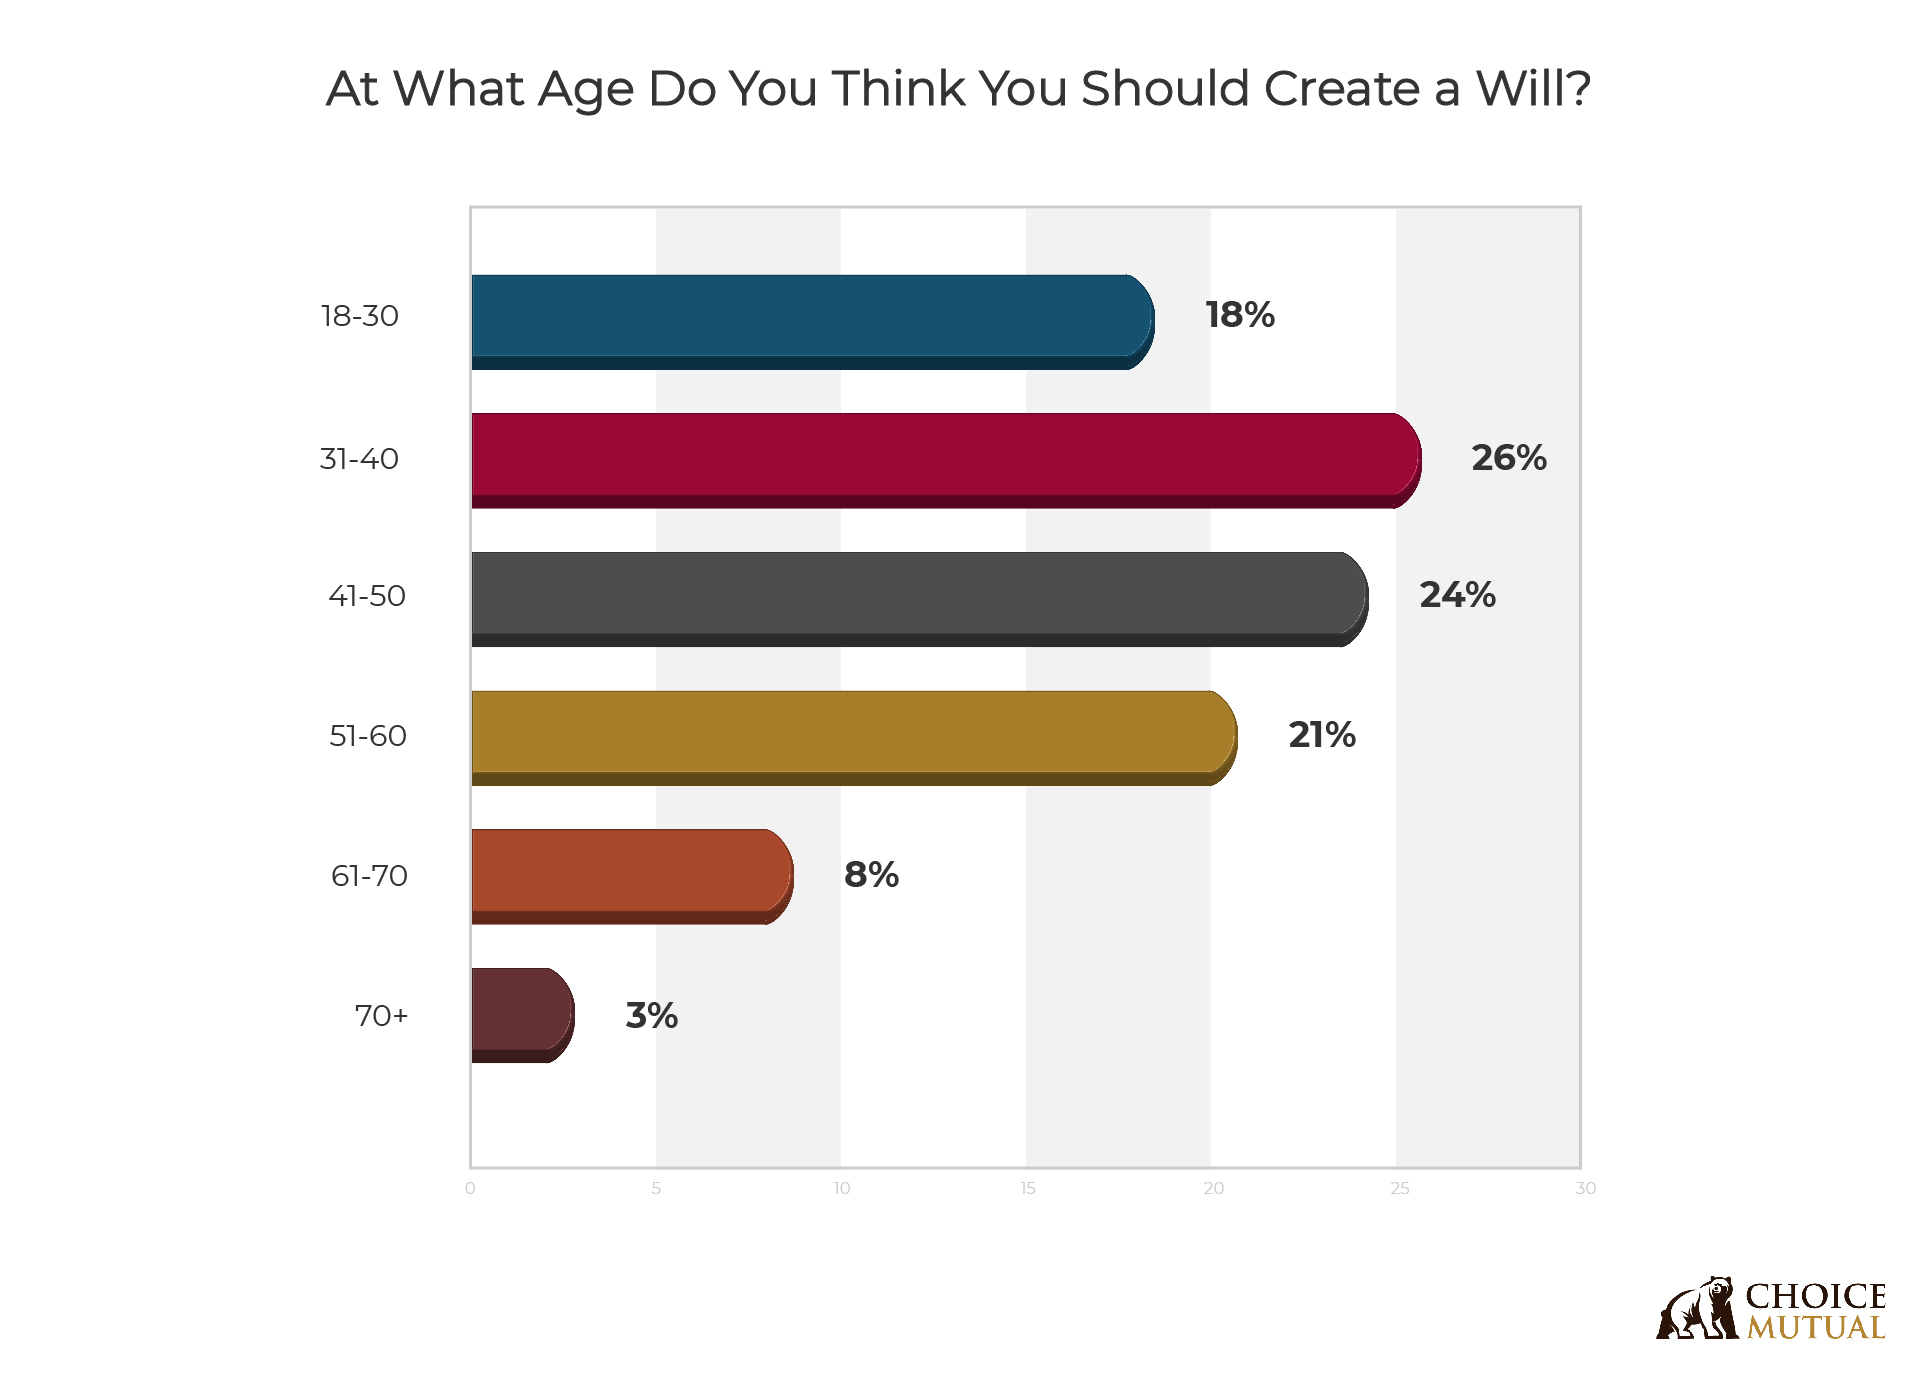 A chart showing when certain age groups think they should have a will.